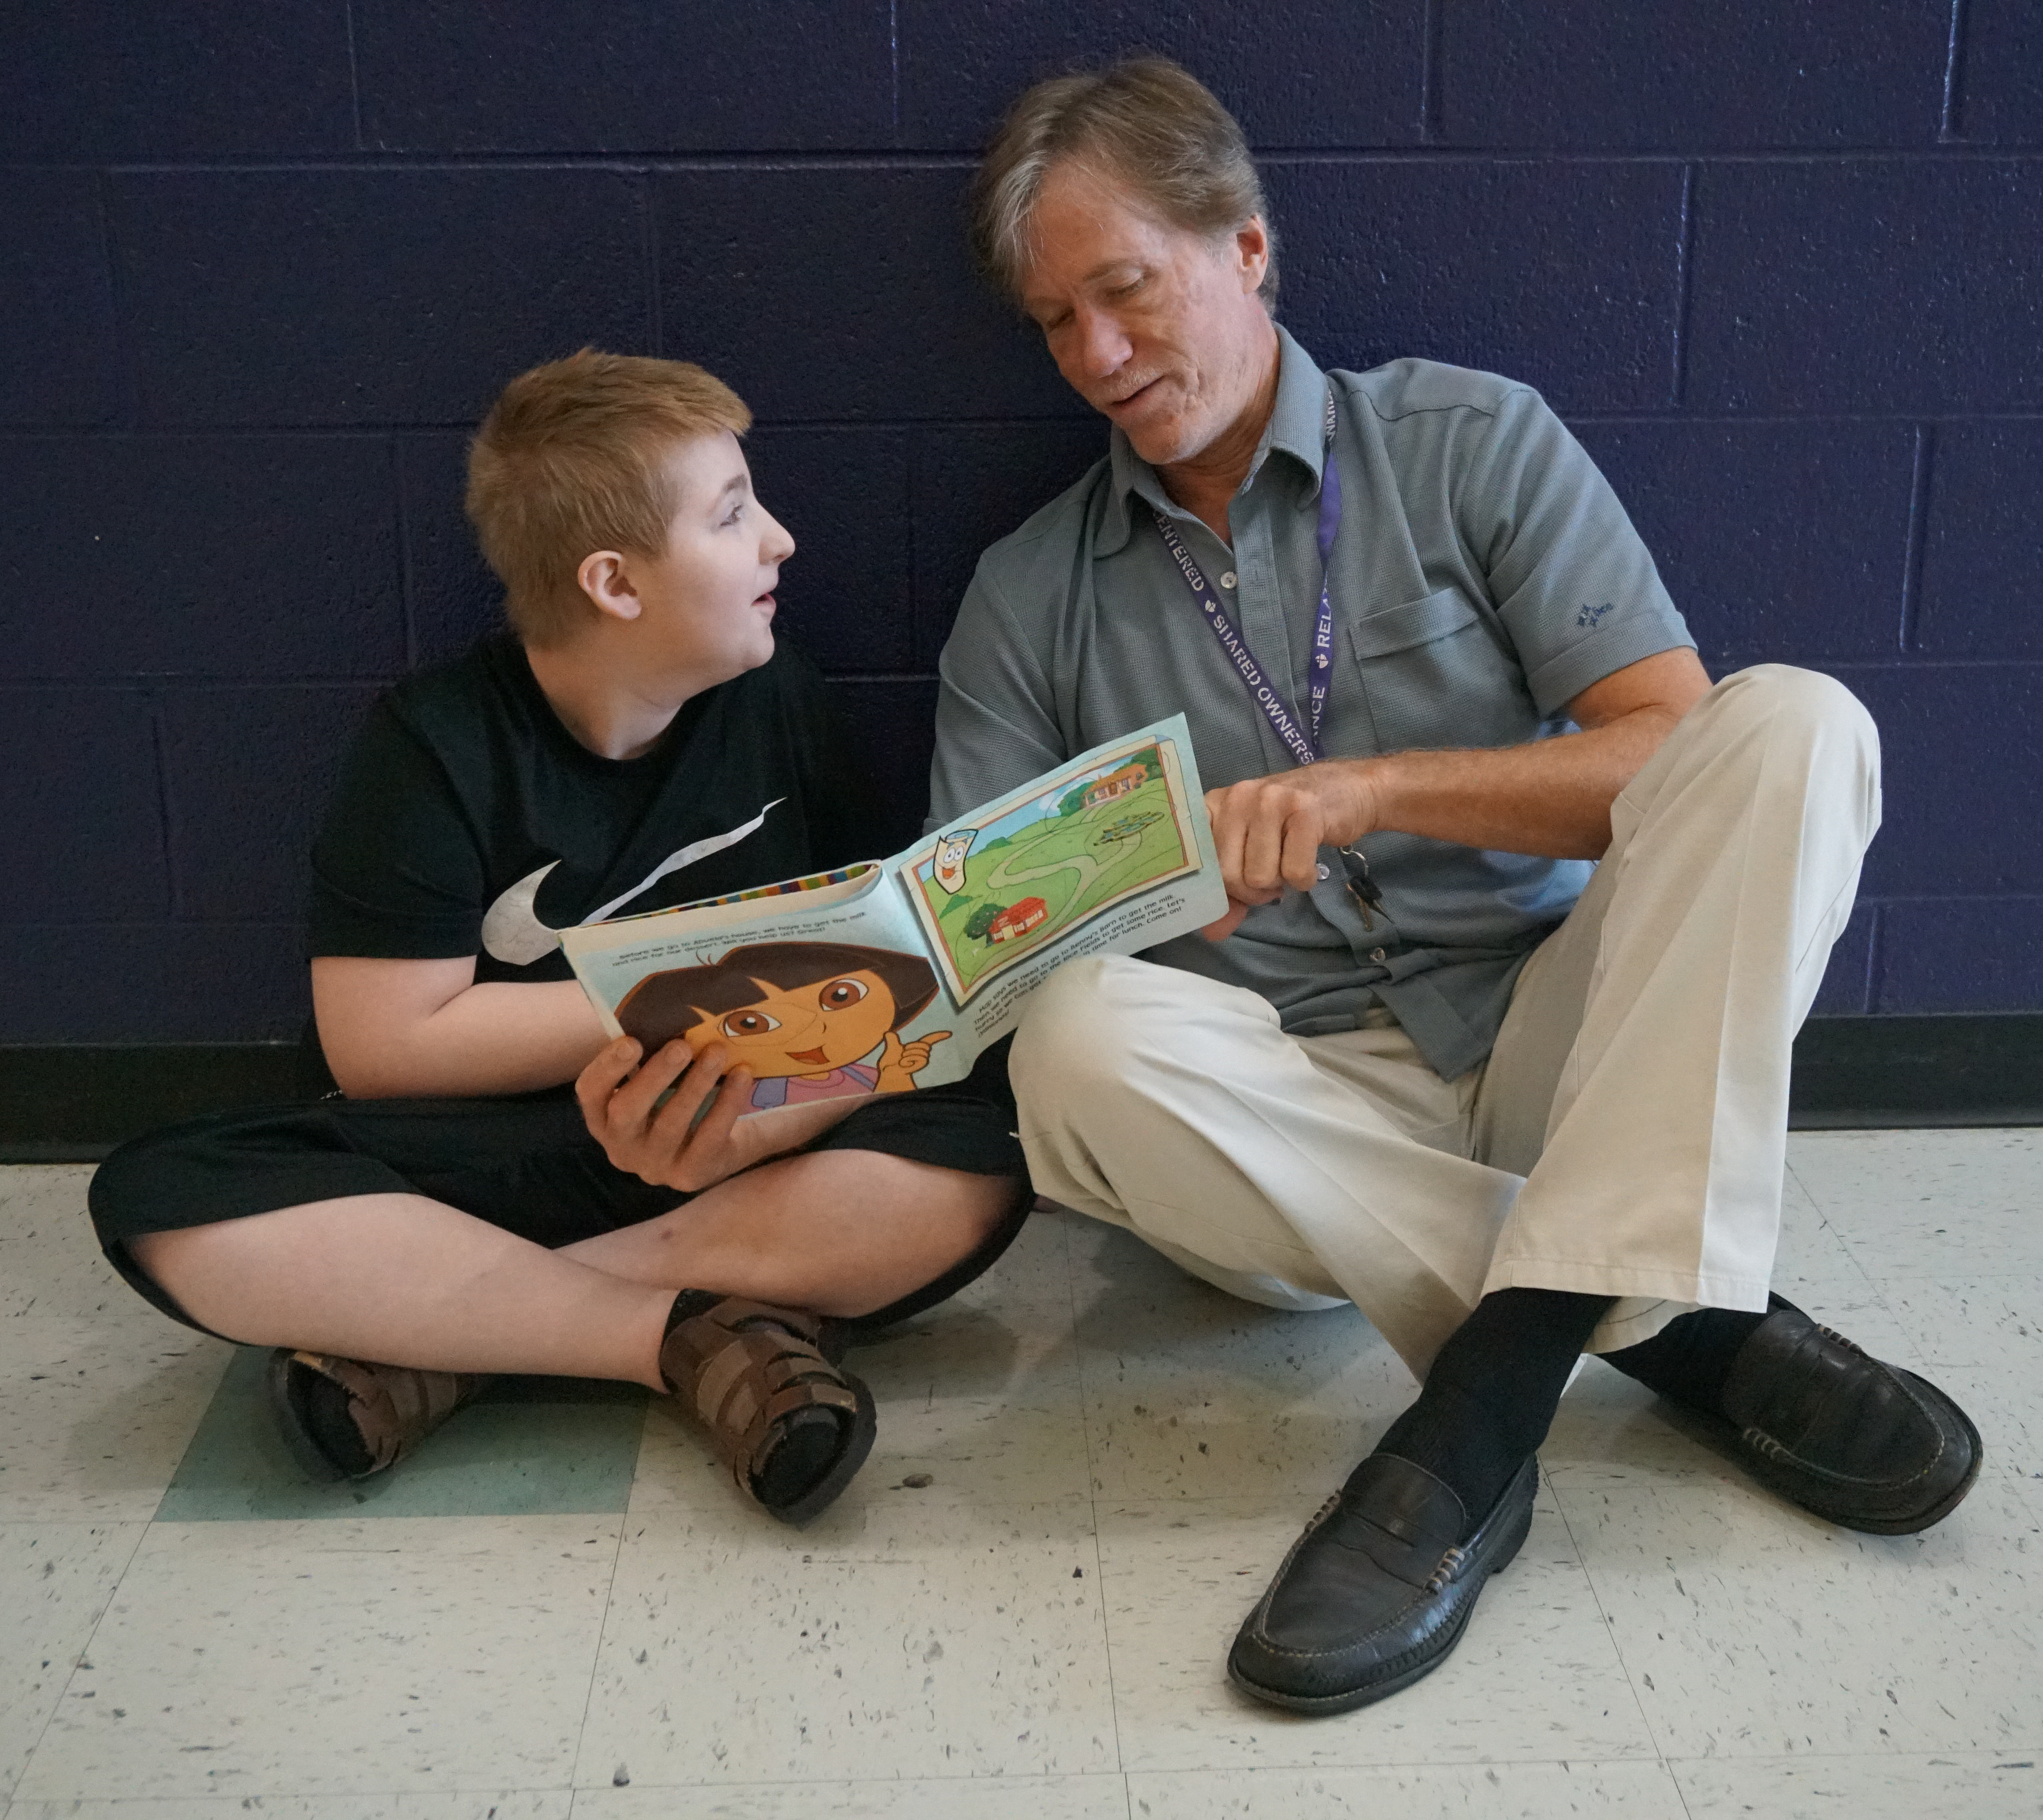 David sits on the floor and reads a book with a student